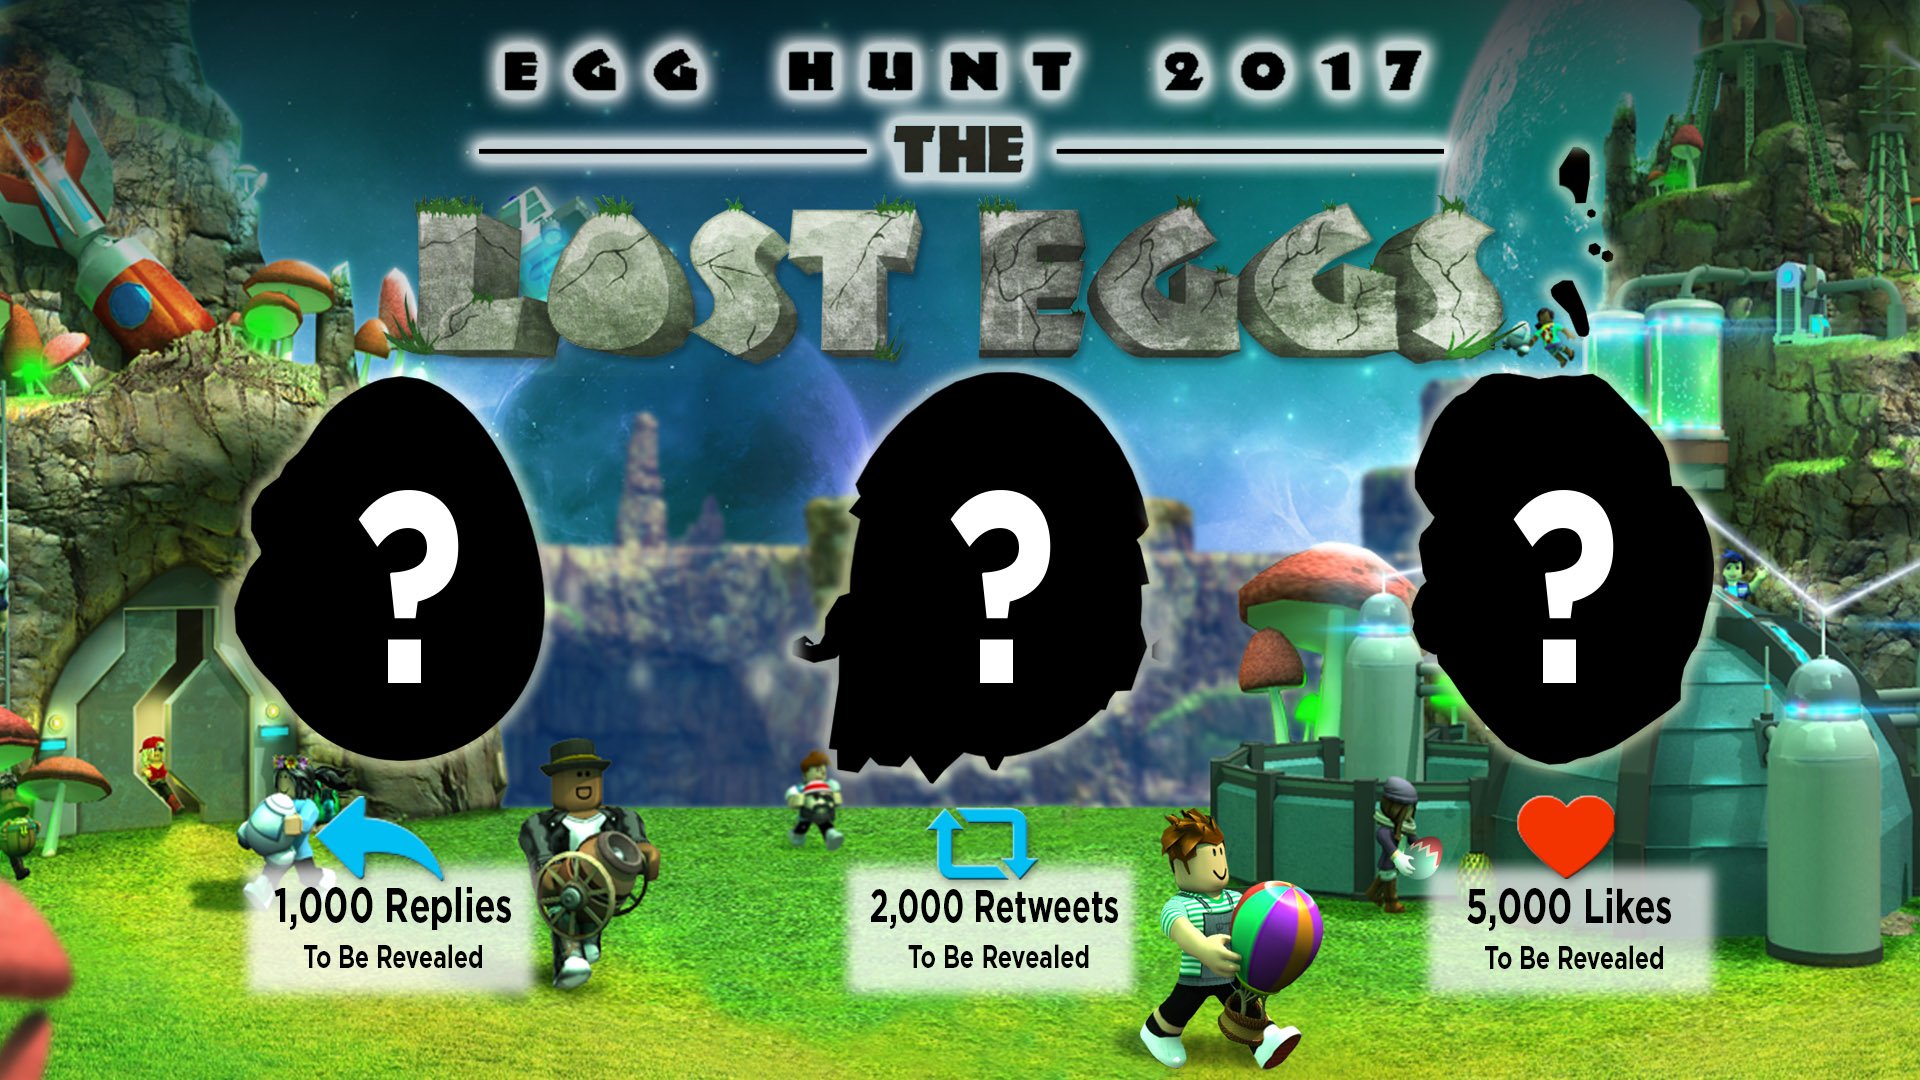 Roblox' Egg Hunt 2017: Leaked Eggs, Gear, Dates & Everything We Know